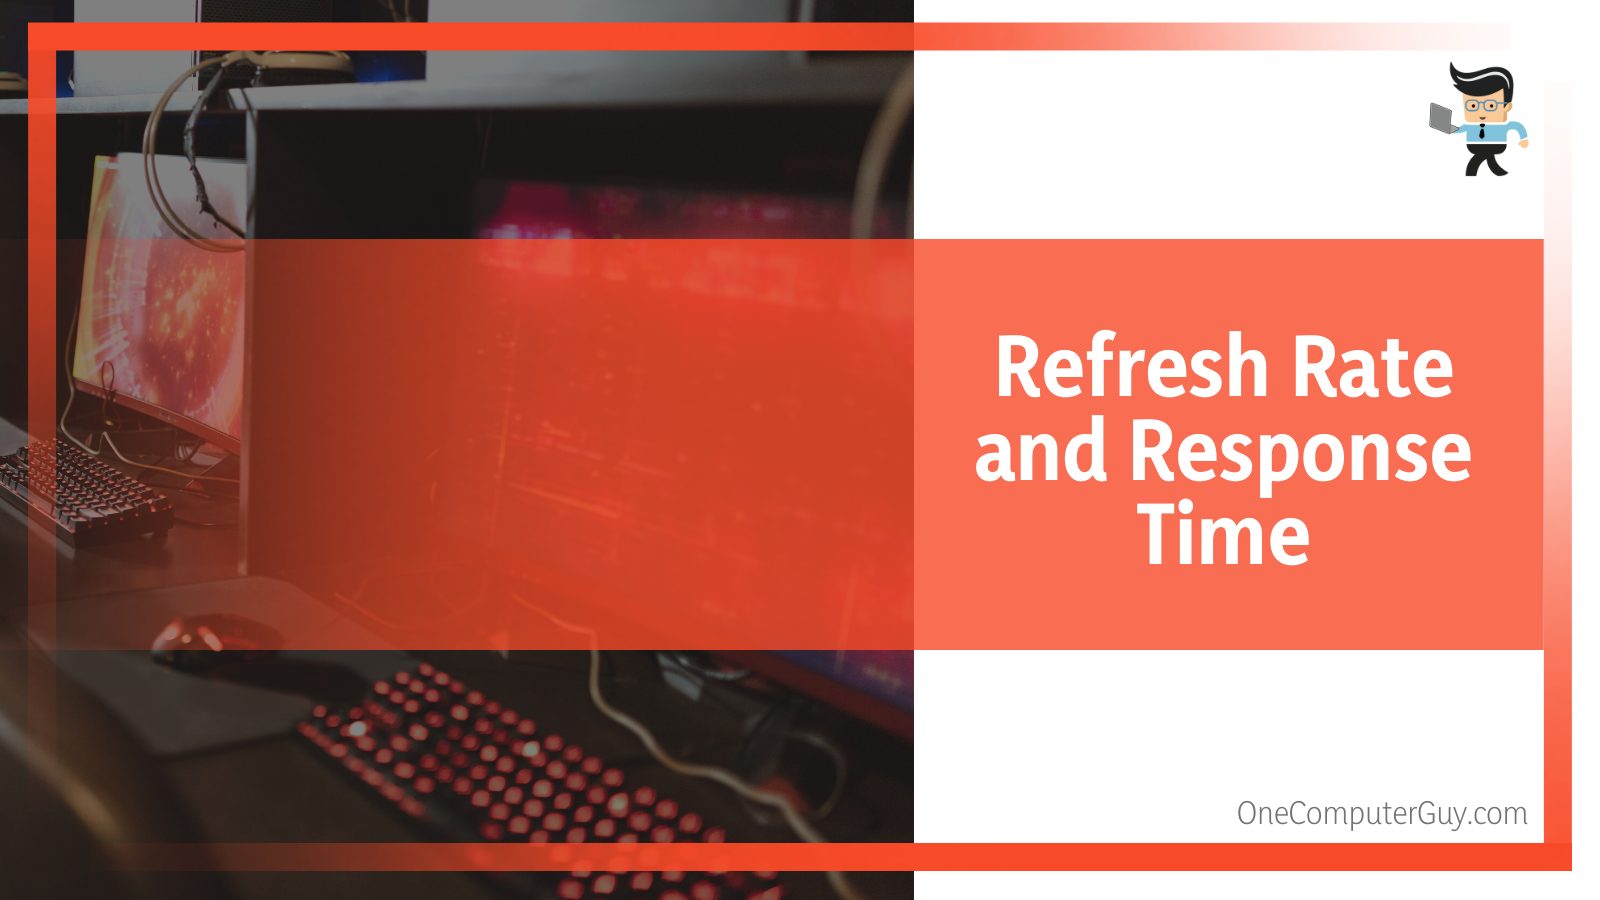 Refresh Rate and Response Time